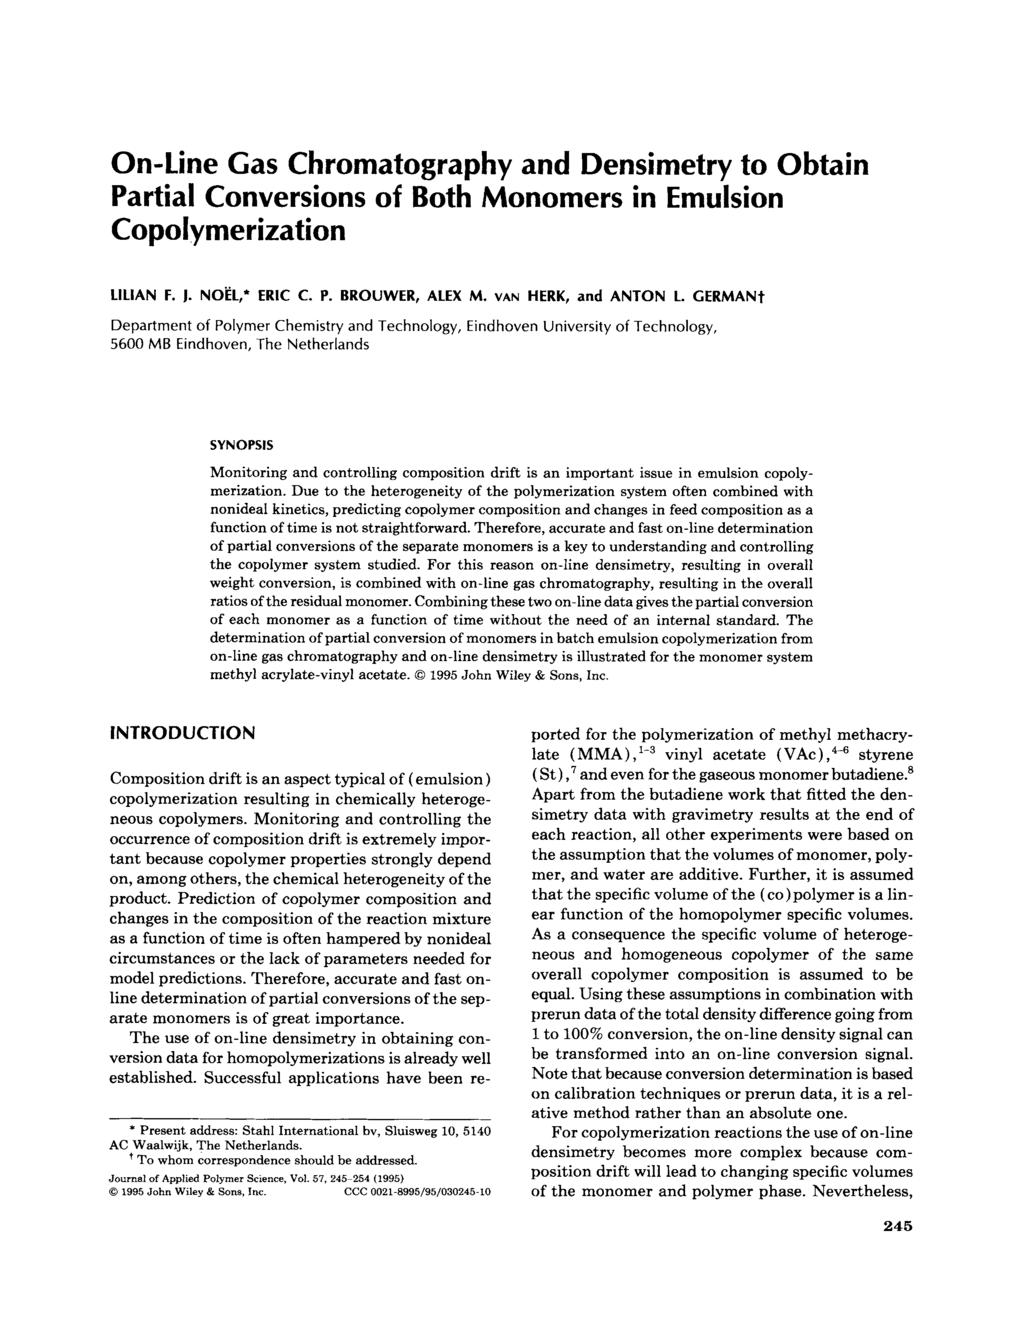 On-line Gas Chromatography and Densimetry to Obtain Partial Conversions of Both Monomers in Emulsion Copolymerization LlLlAN F. J. NOEL,' ERIC C. P. BROUWER, ALEX M. VAN HERK, and ANTON 1.